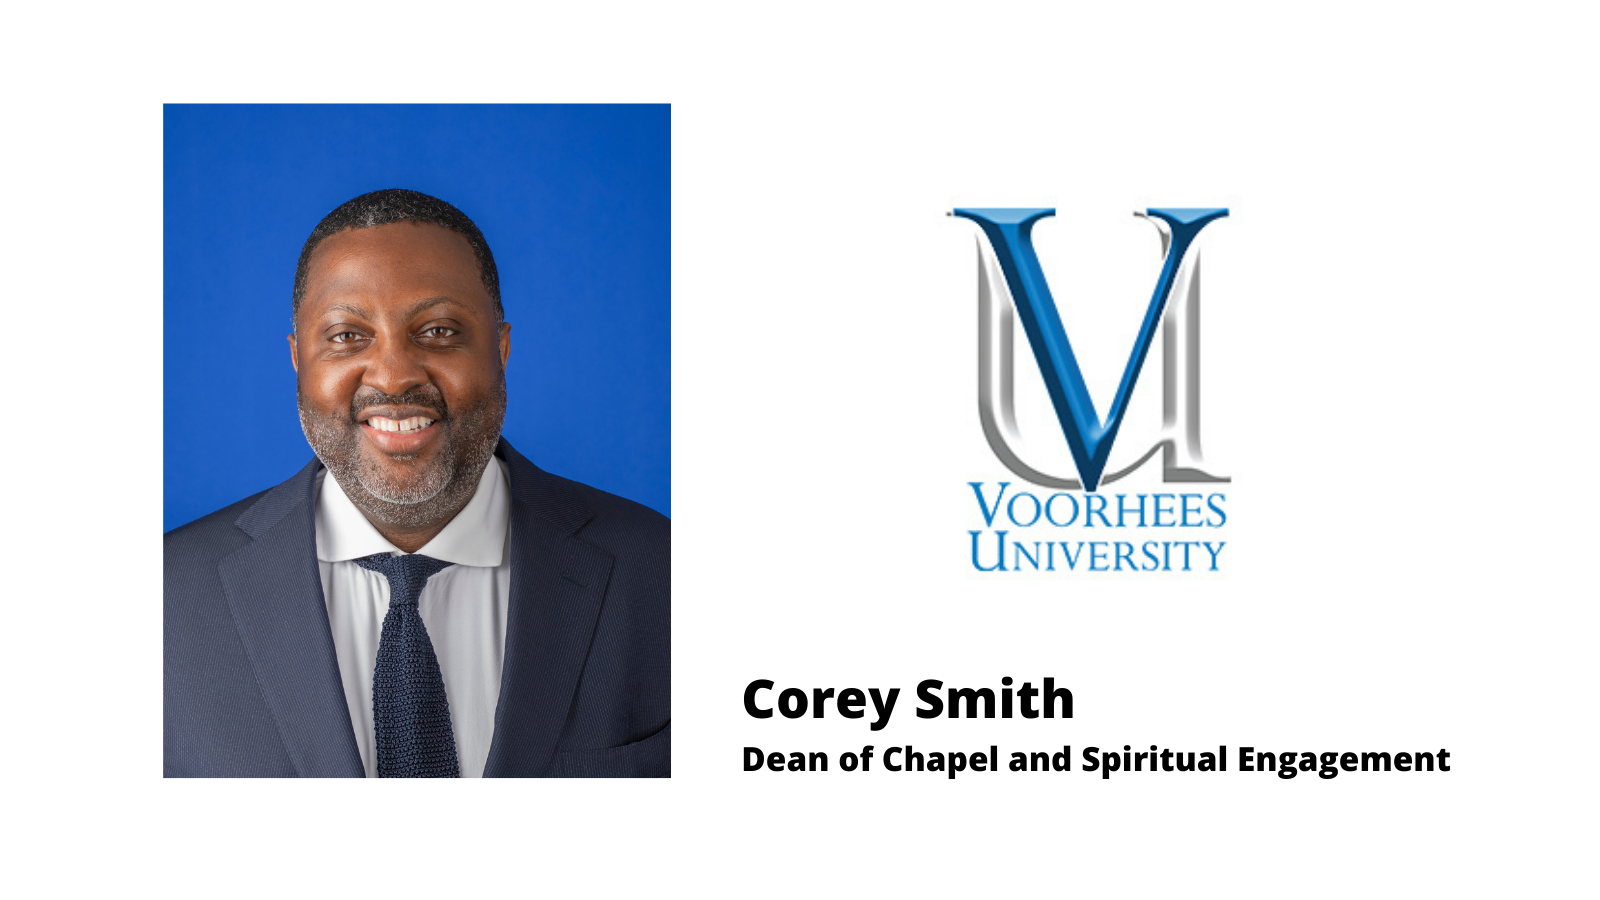 Voorhees University Dean of Chapel and Spiritual Engagement - Corey Smith